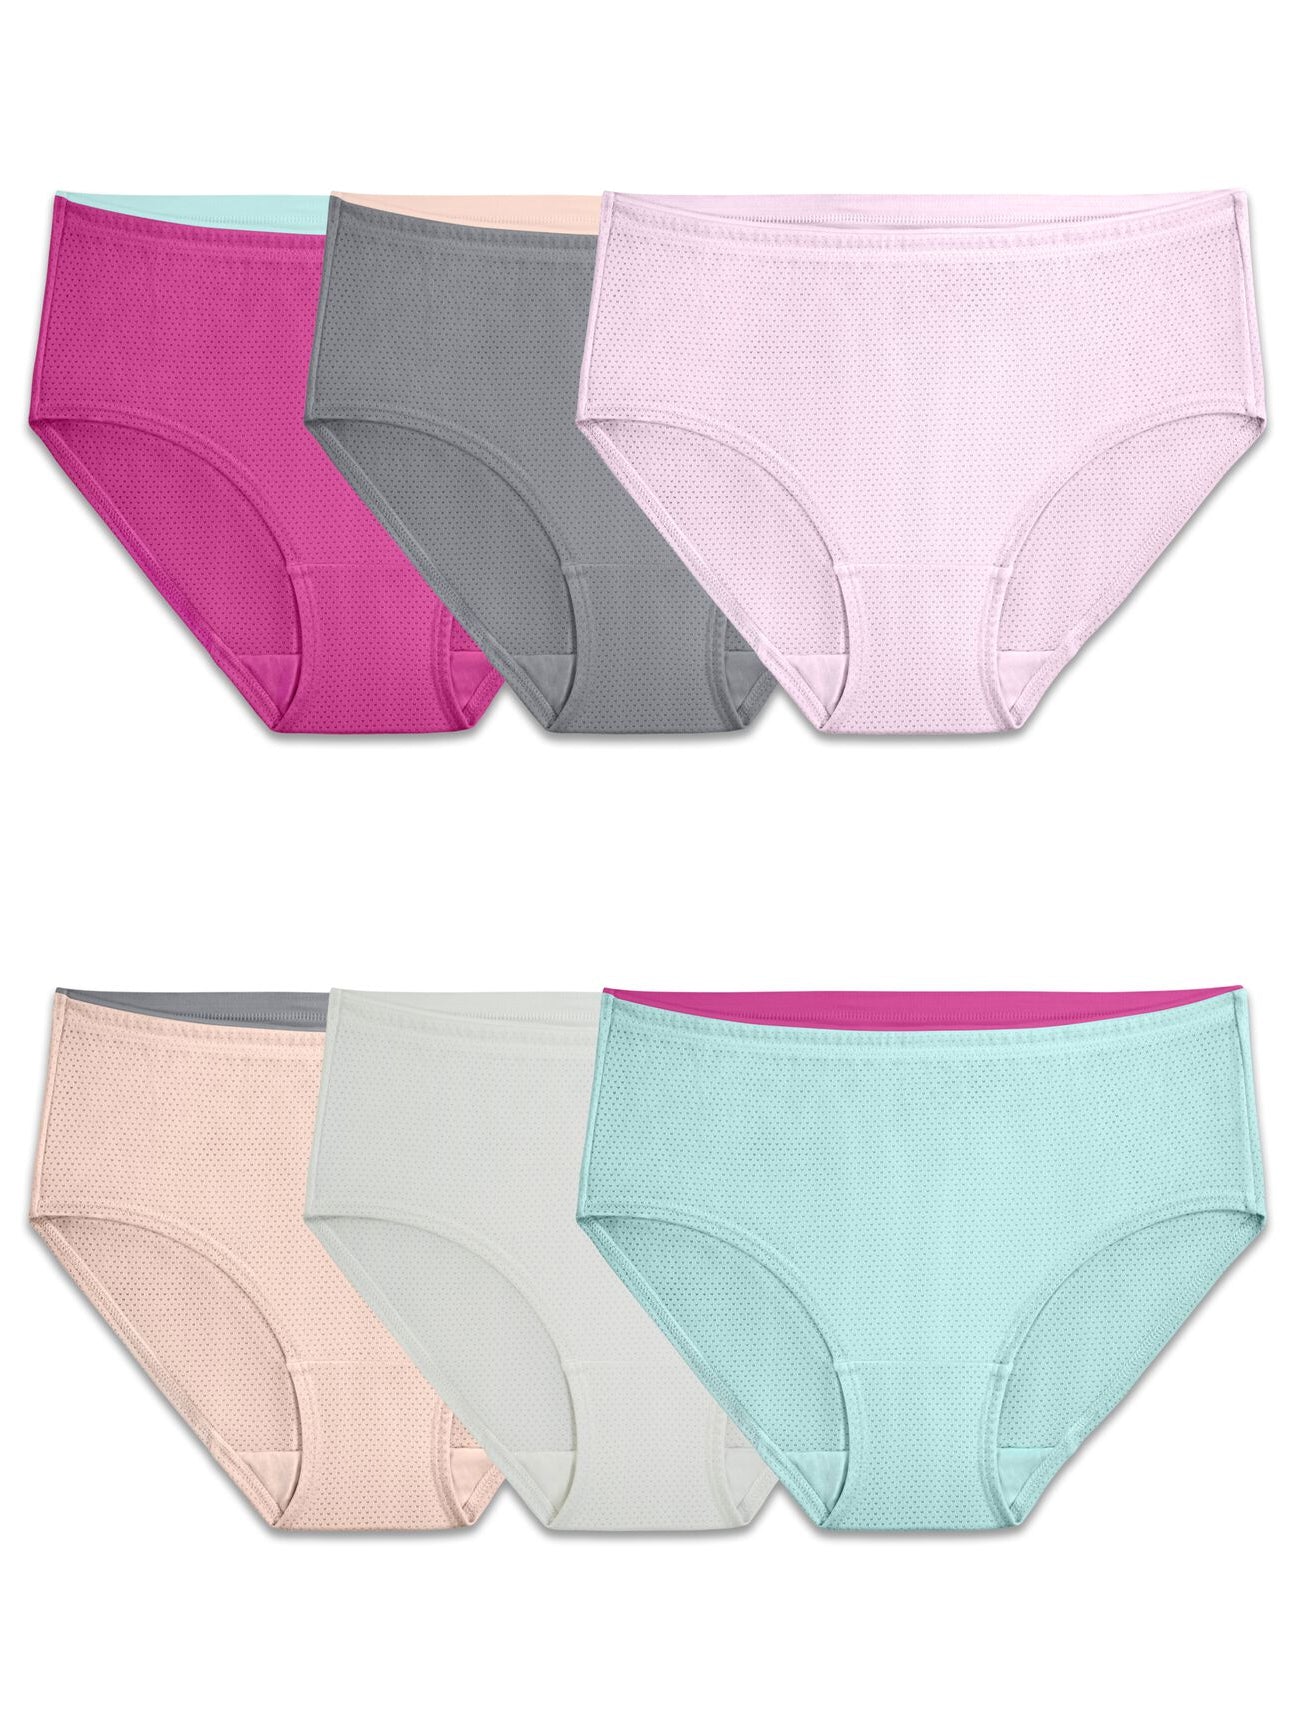 Buy Cut and Style Women Cotton Underwear High Waisted Control Top Full  Coverage Briefs Soft Breathable Ladies Panties Pack of 3(36 Till 40)  Assorted at